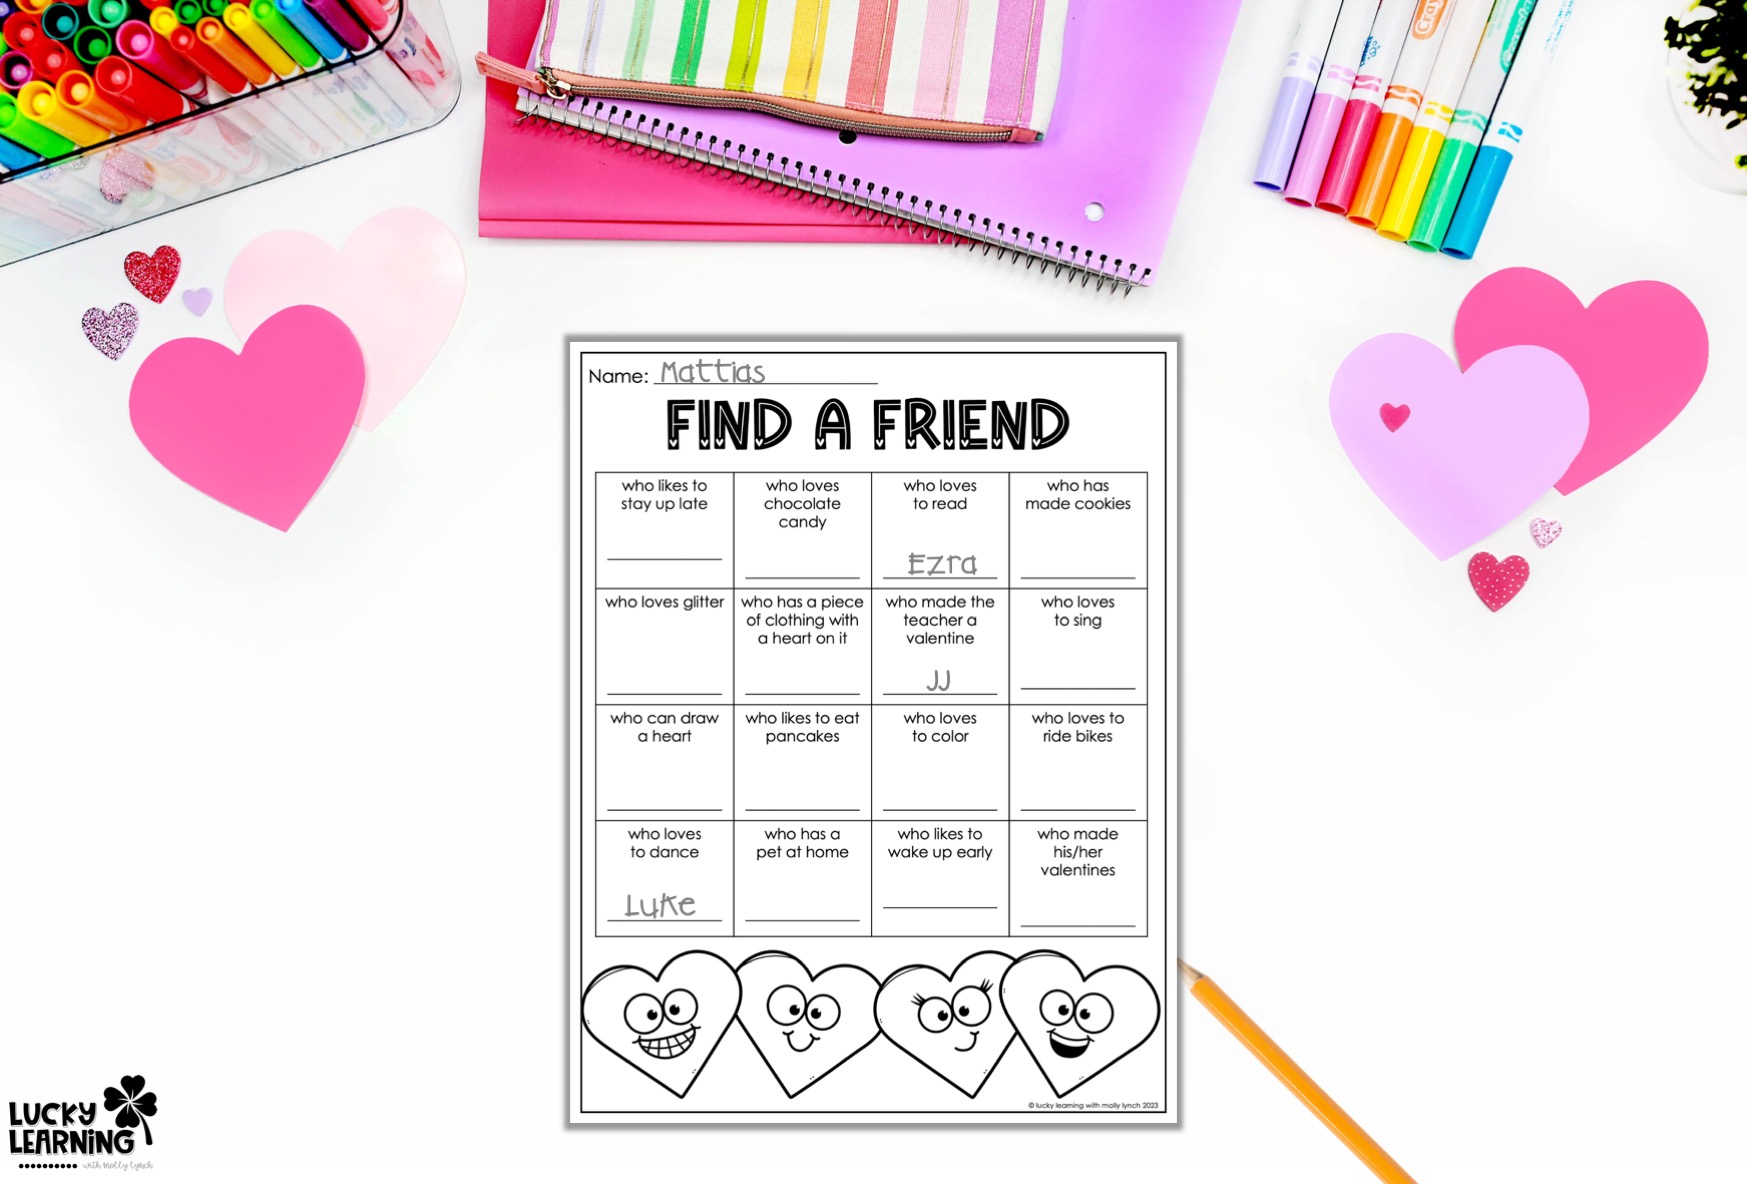 find a friend activity for elementary classroom on valentine's day | Lucky Learning with Molly Lynch